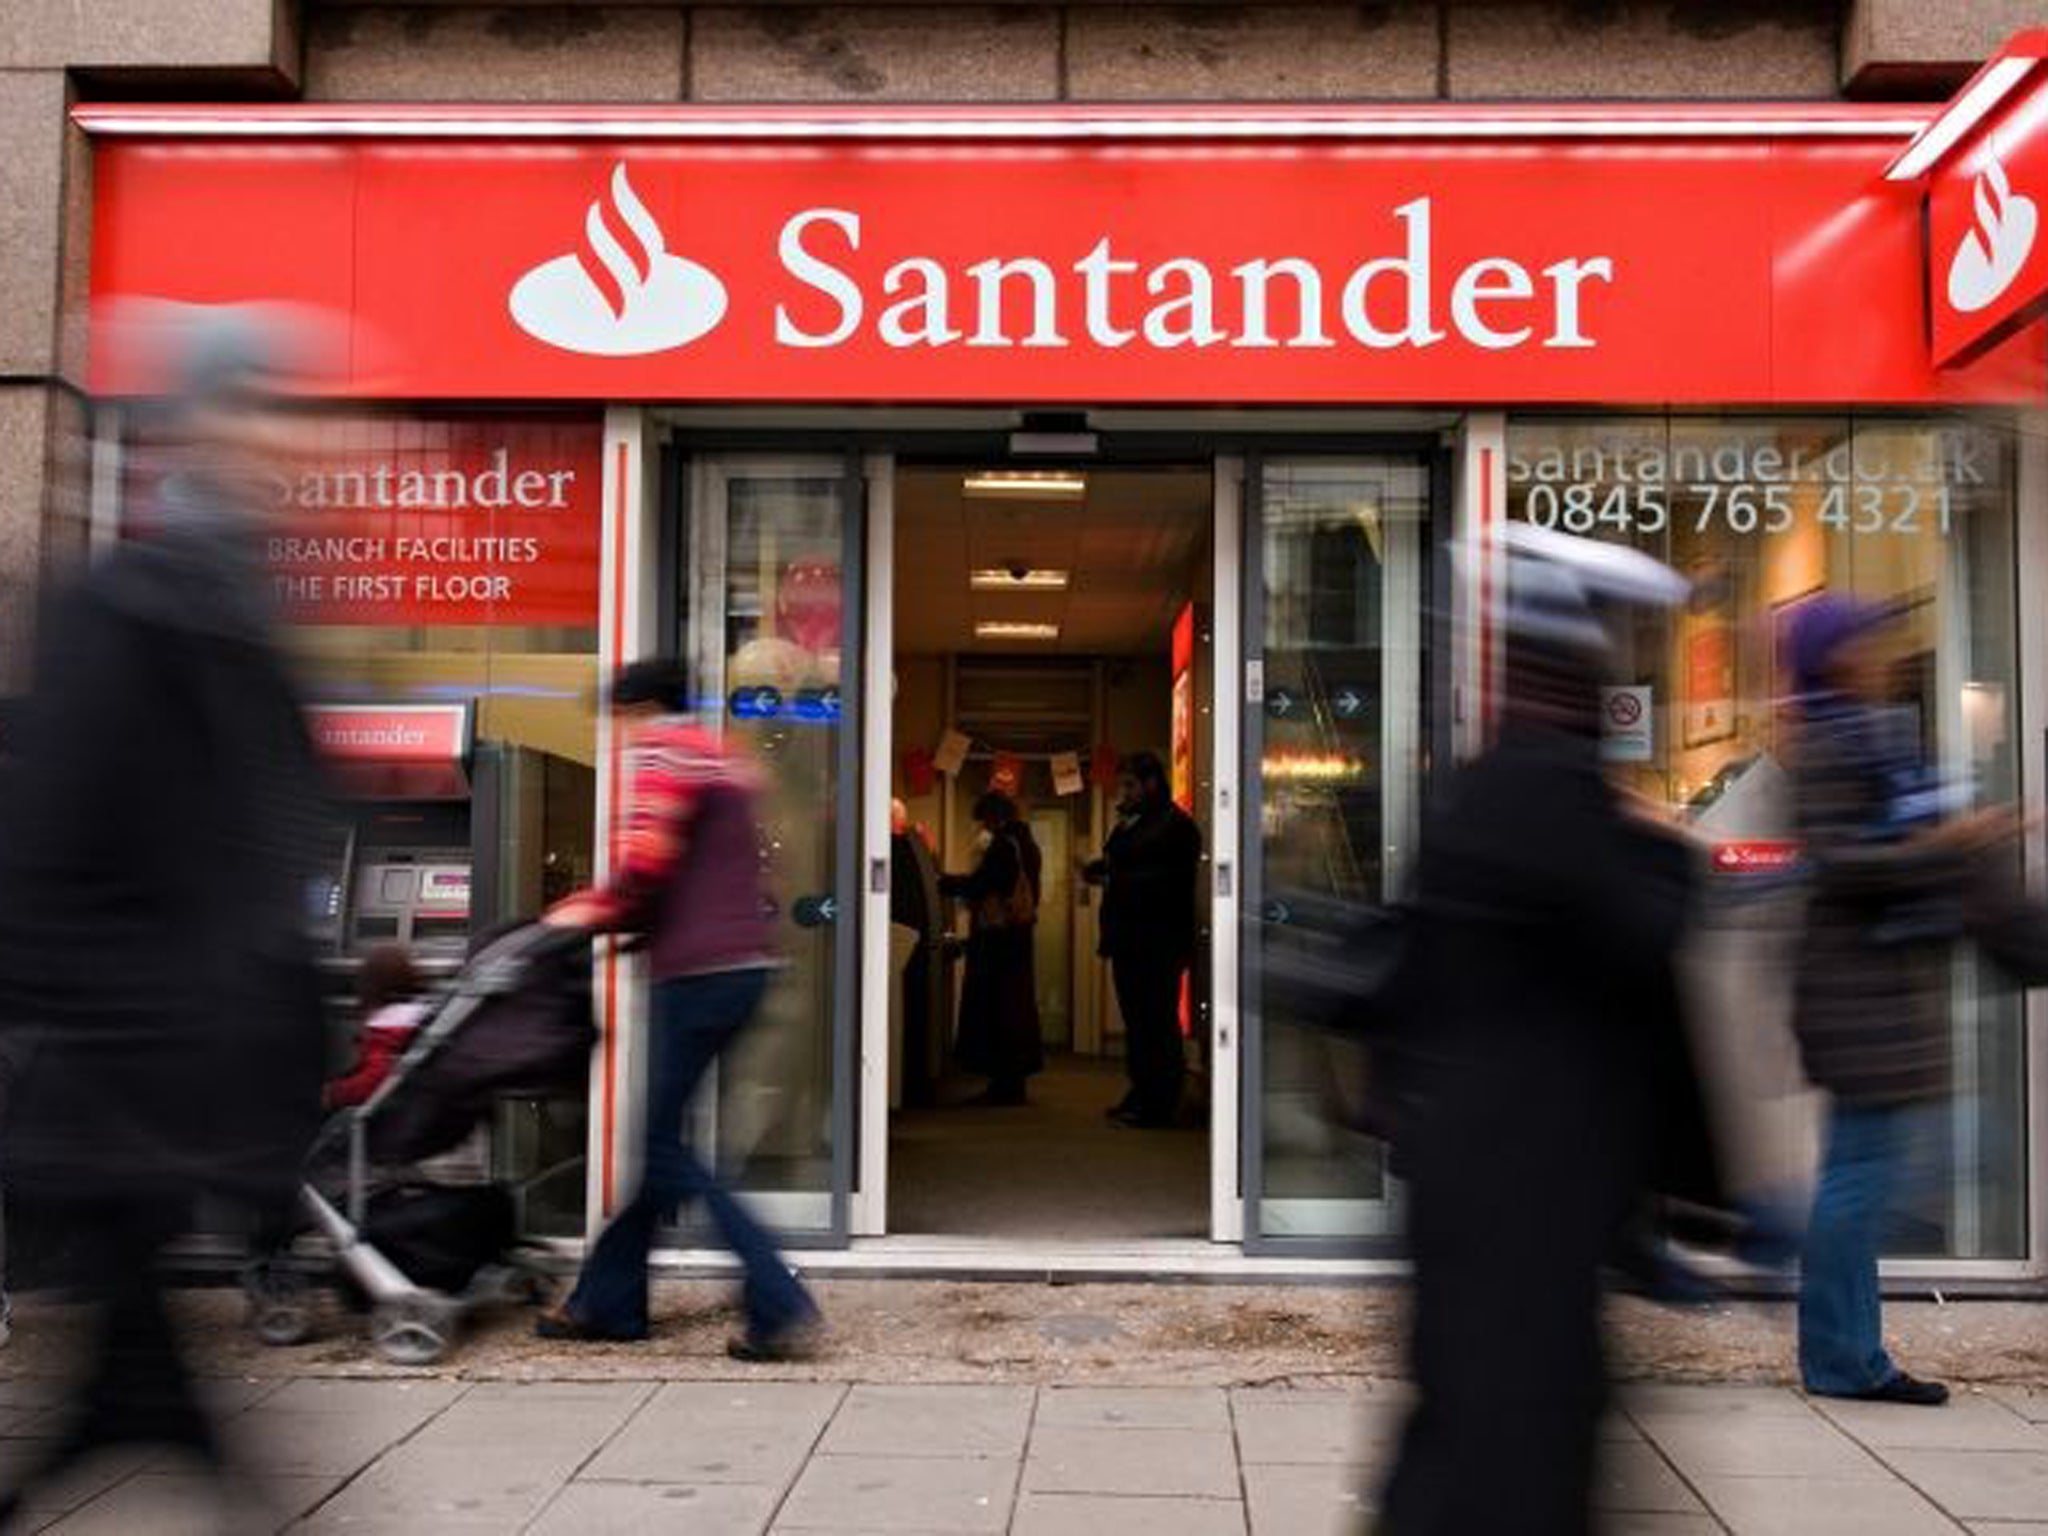 A branch of Santander has been targeted in an 'audacious' cyber-attack